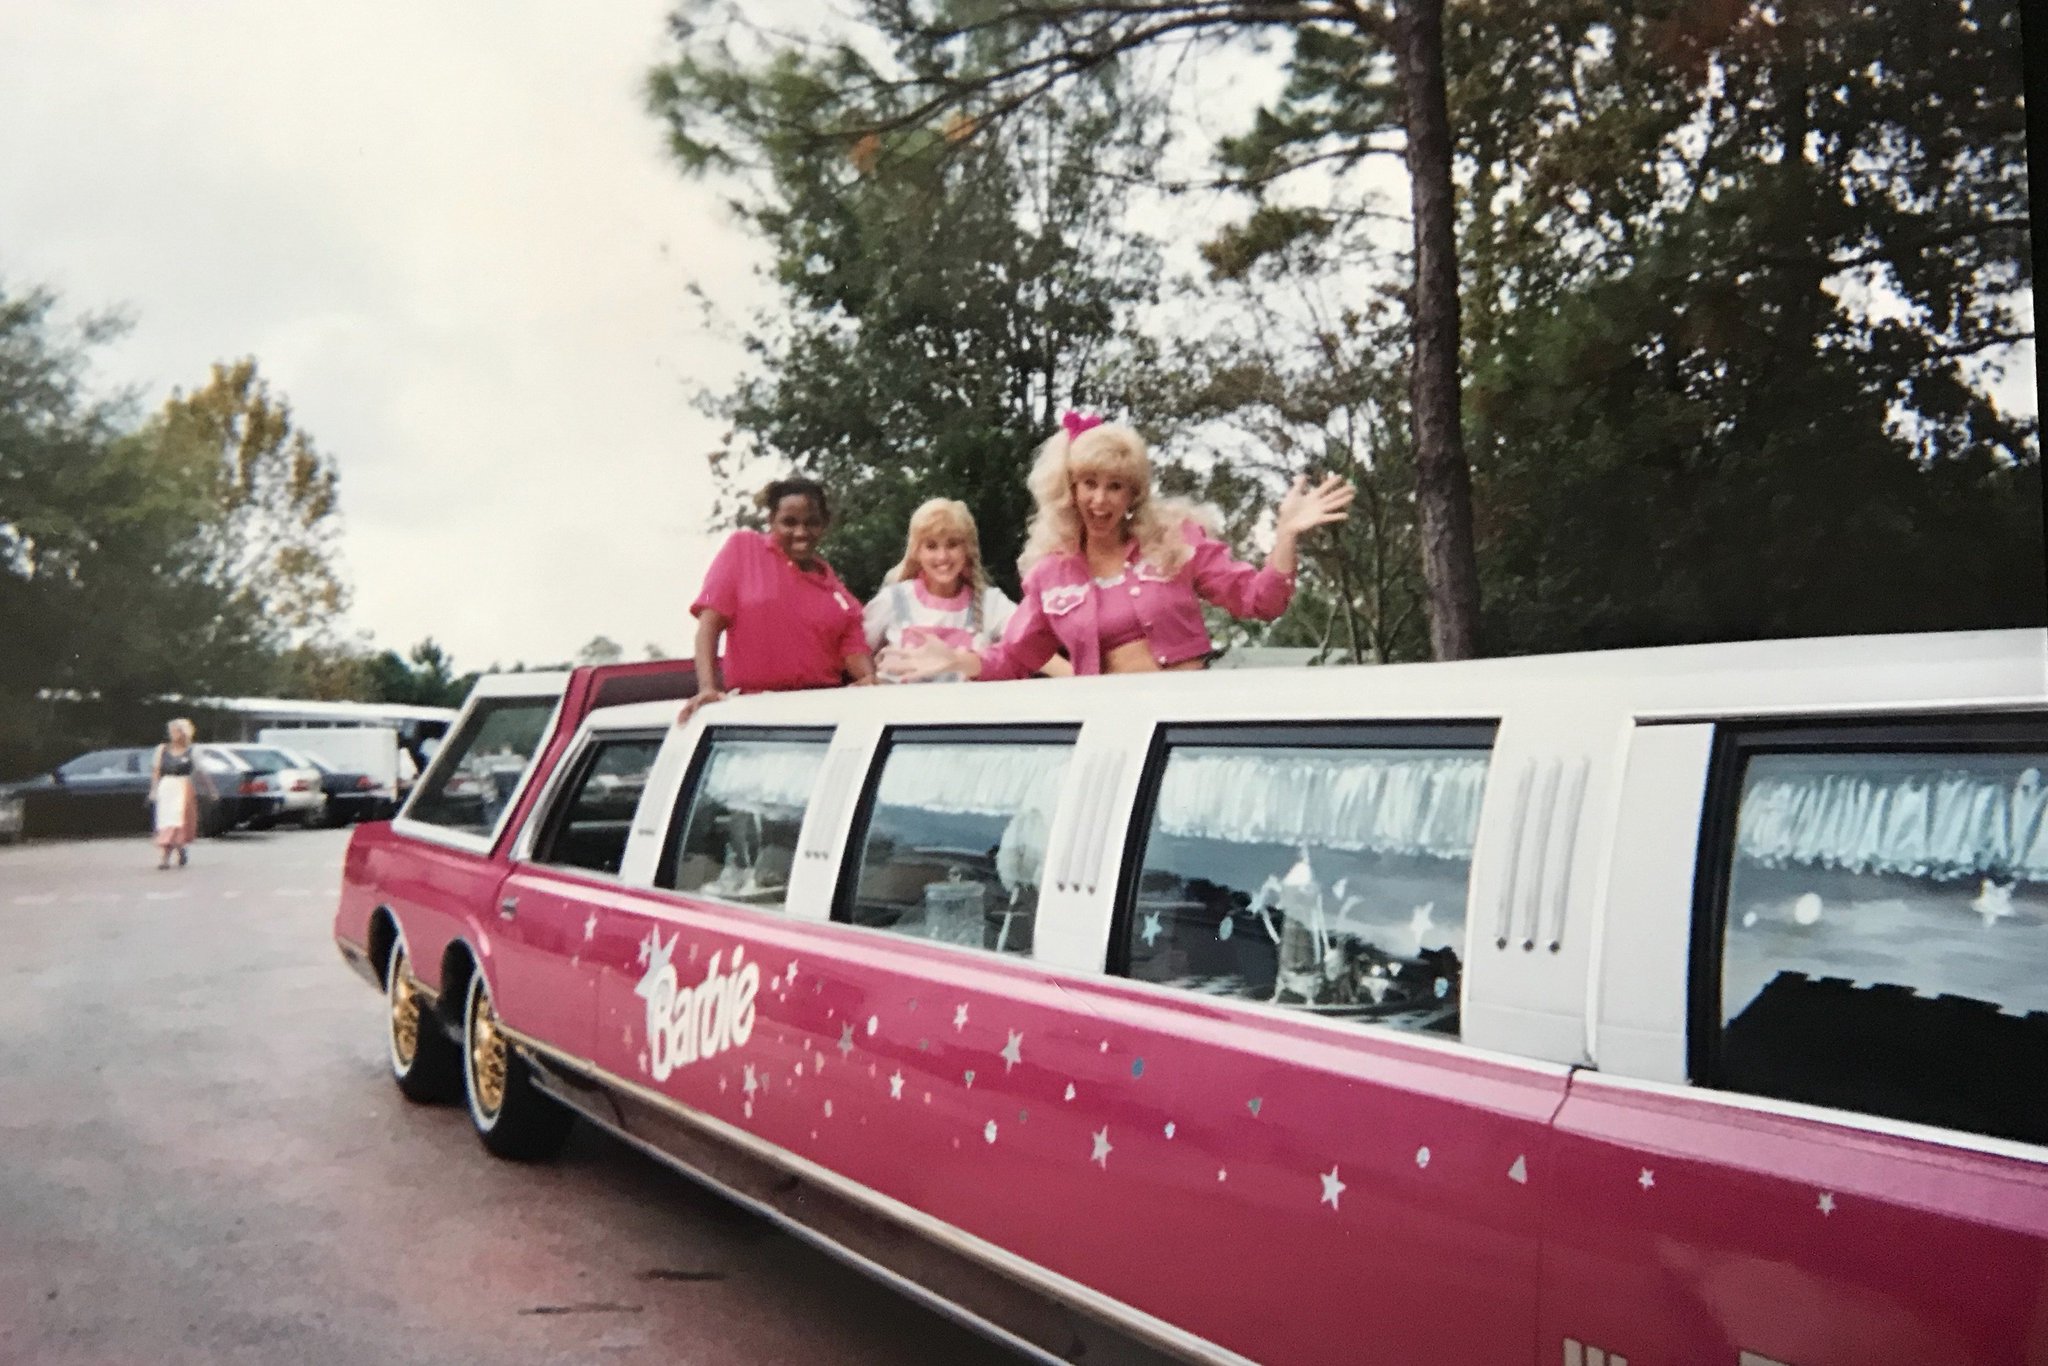 Tammy Tuckey on Twitter: "Let's talk about that hot pink limo. Every girl wanted one like it, and for good reason! @Barbie Limo was actually repurposed from the 1989 LiMOUSEine (photo #